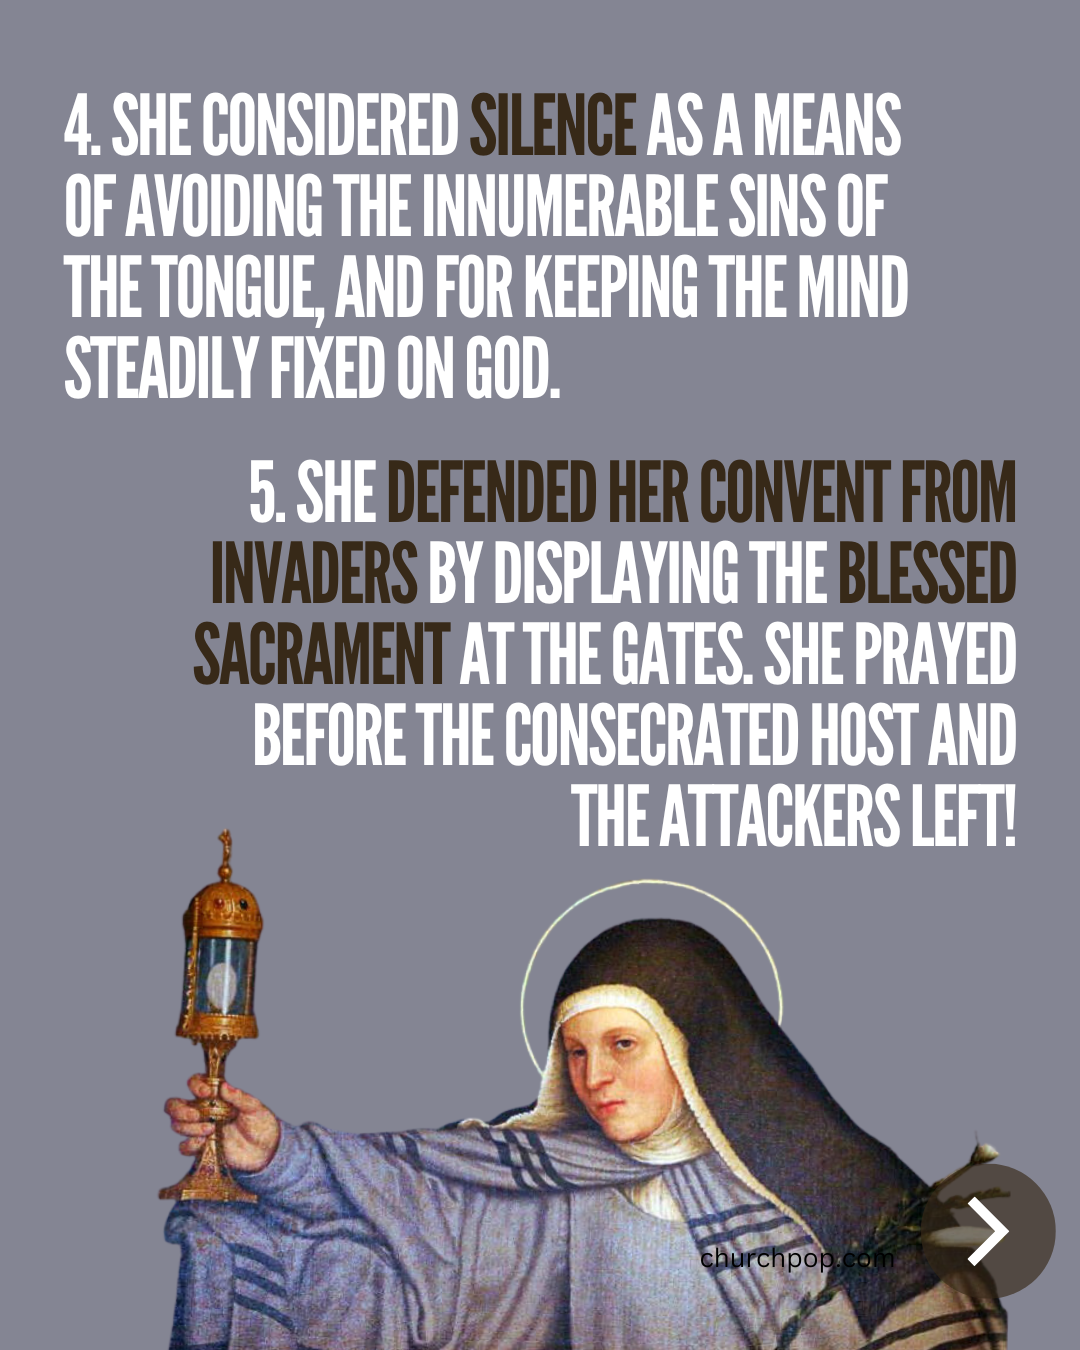 What is St. Clare of Assisi known for?